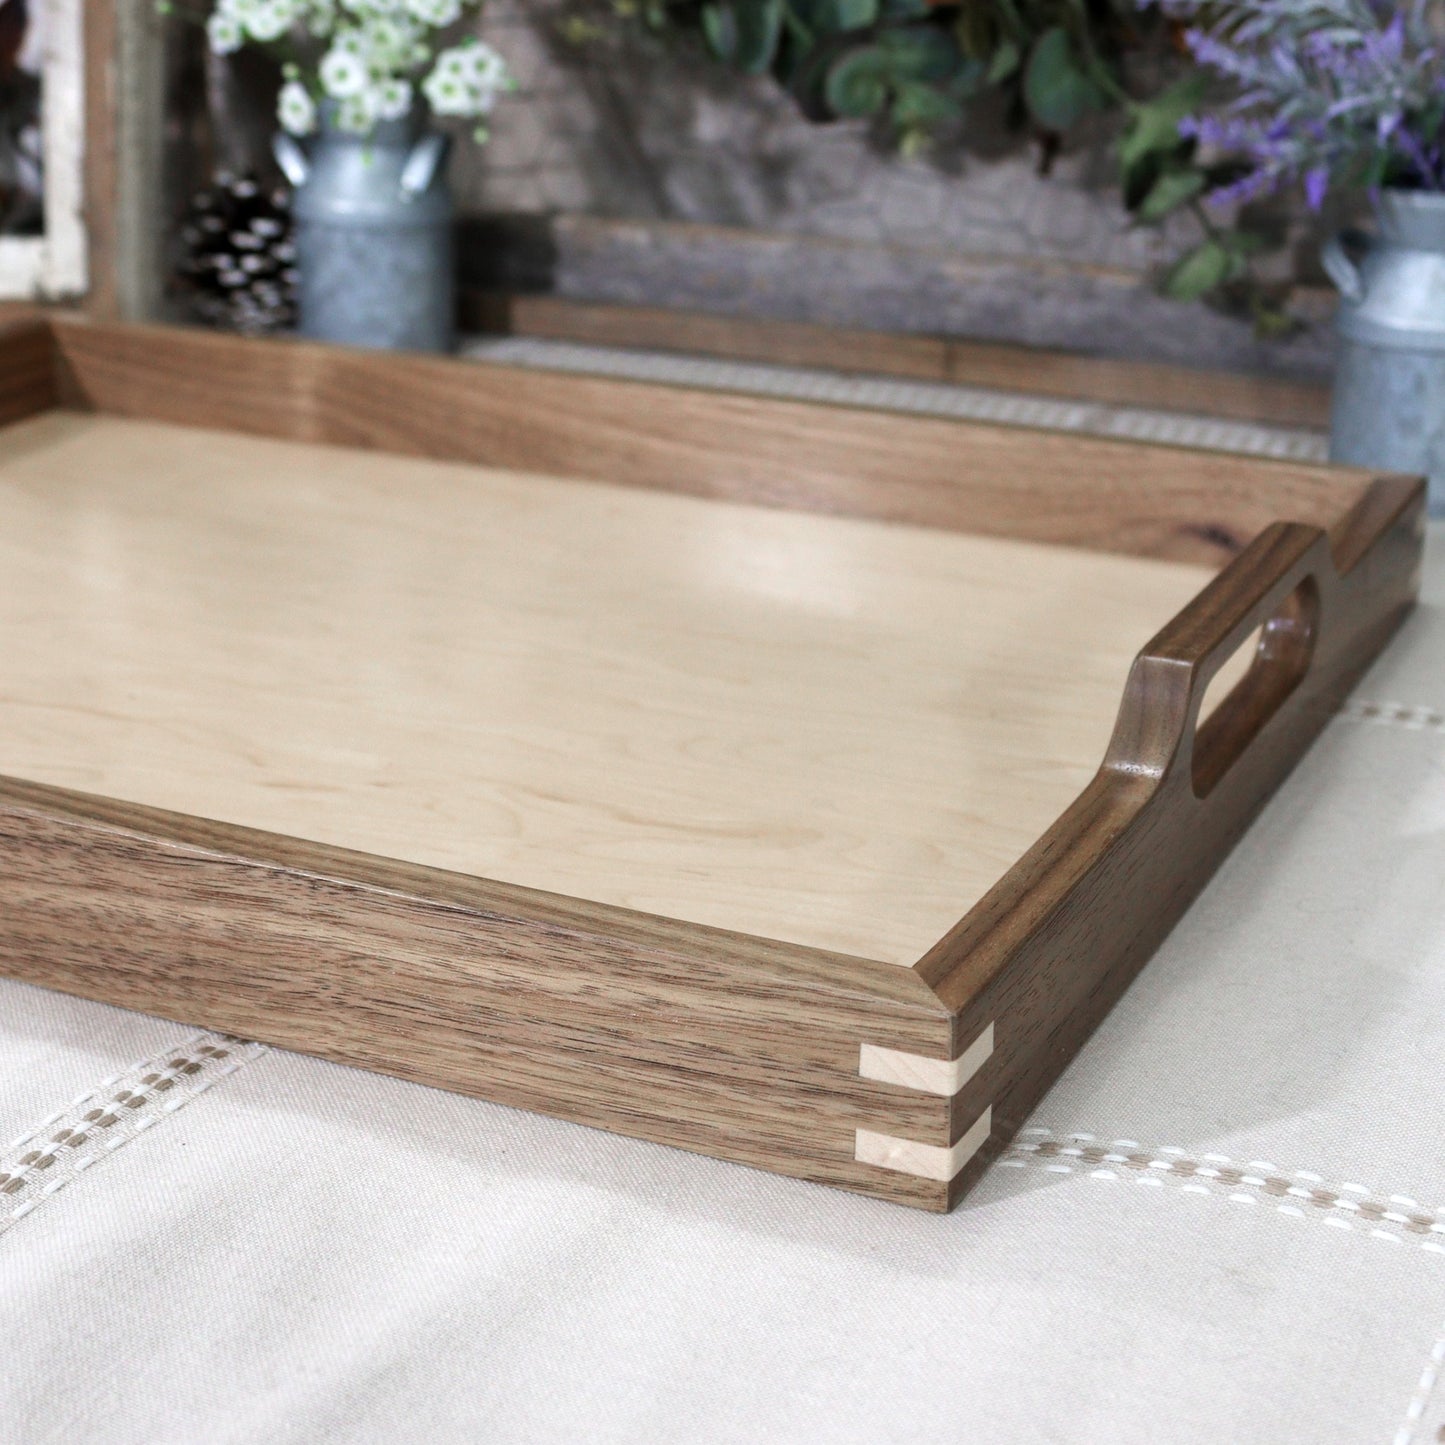 Walnut & Maple Wooden Serving Tray with handles